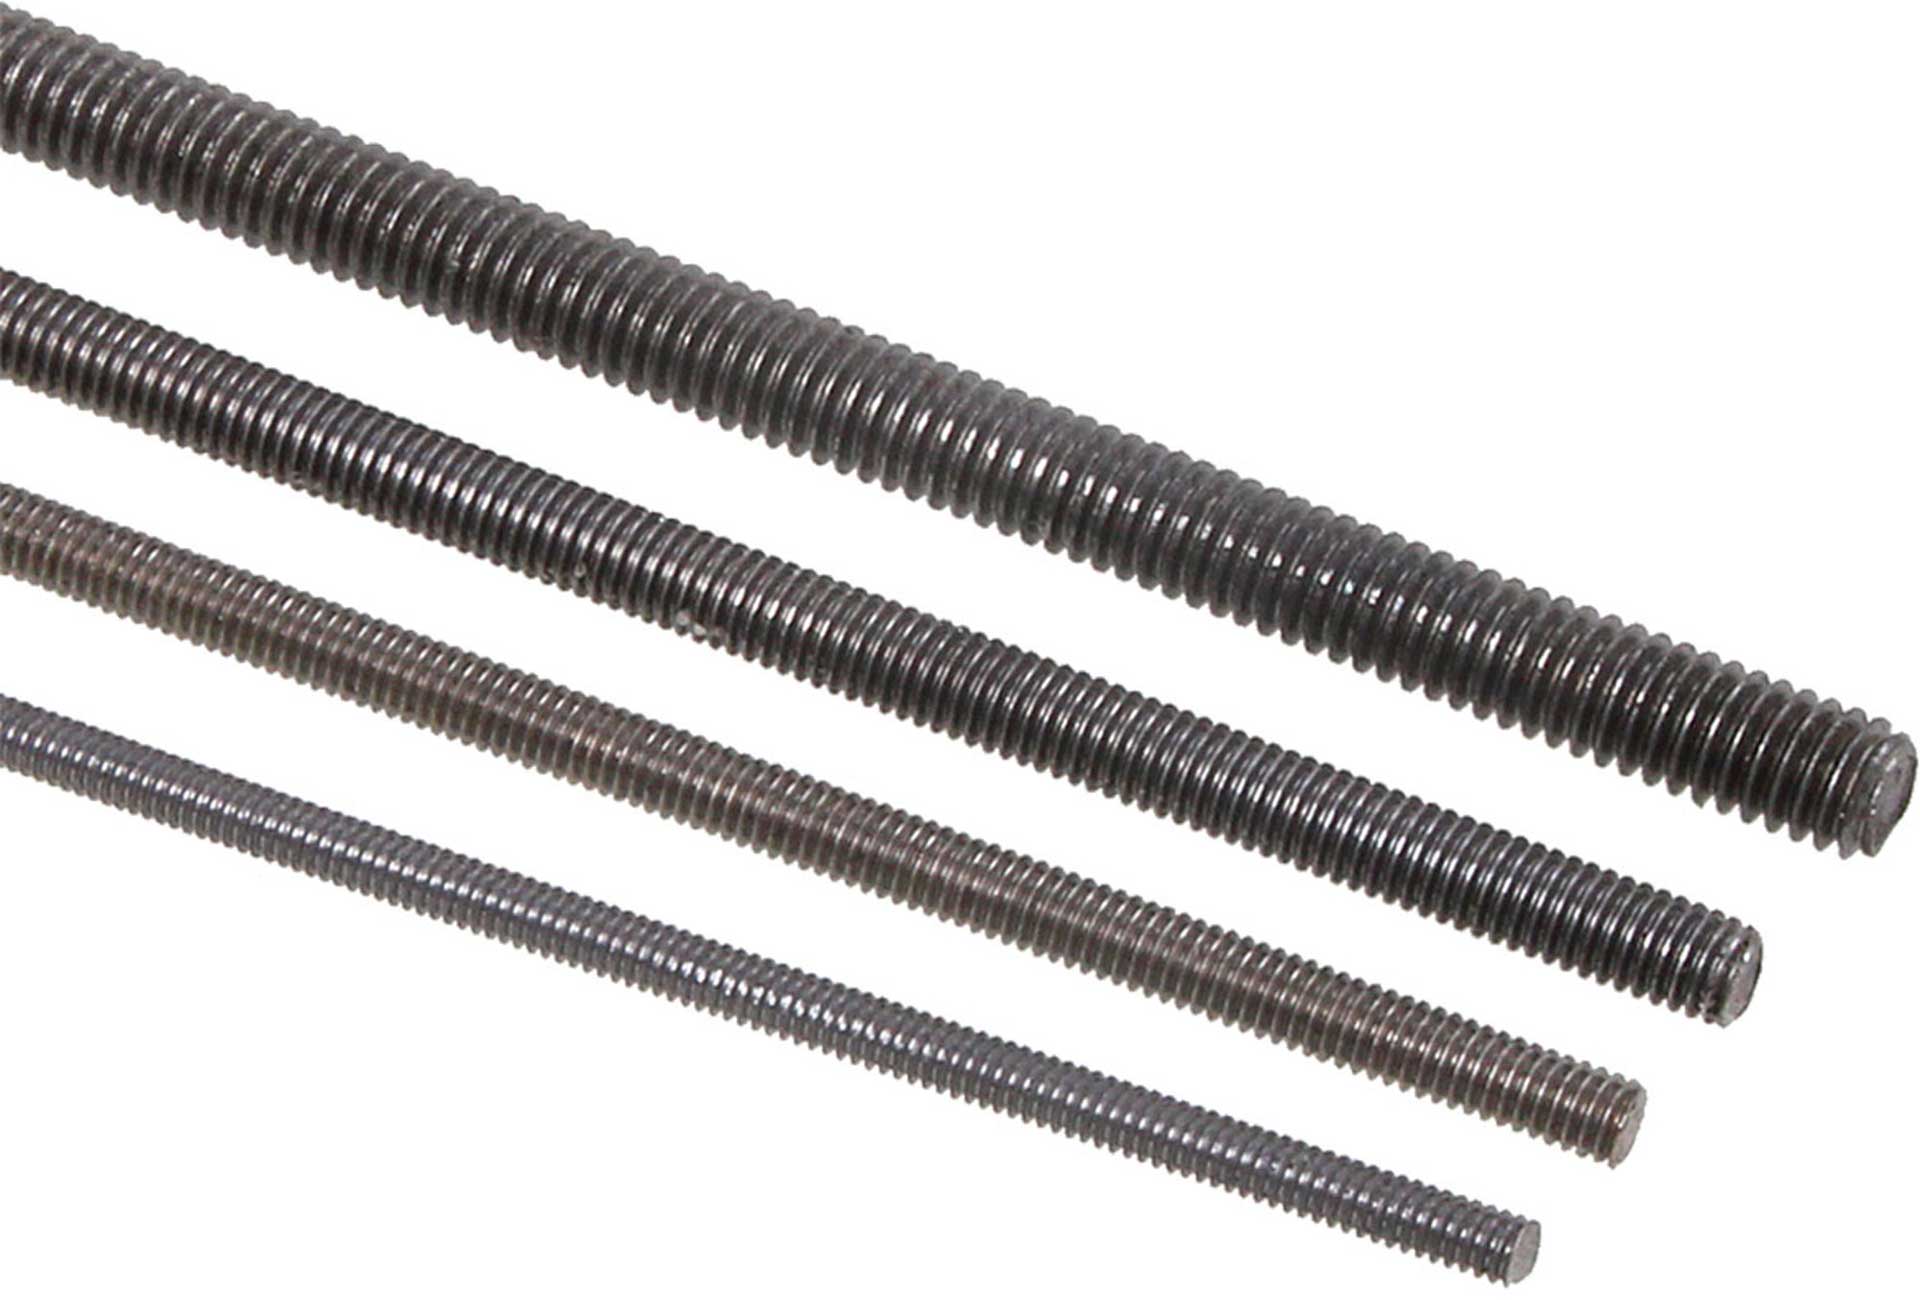 FAMOTEC THREADED ROD M2,5 THROUGH 500MM LONG, WITH FULLY THREADED, STEEL, BRIGHT